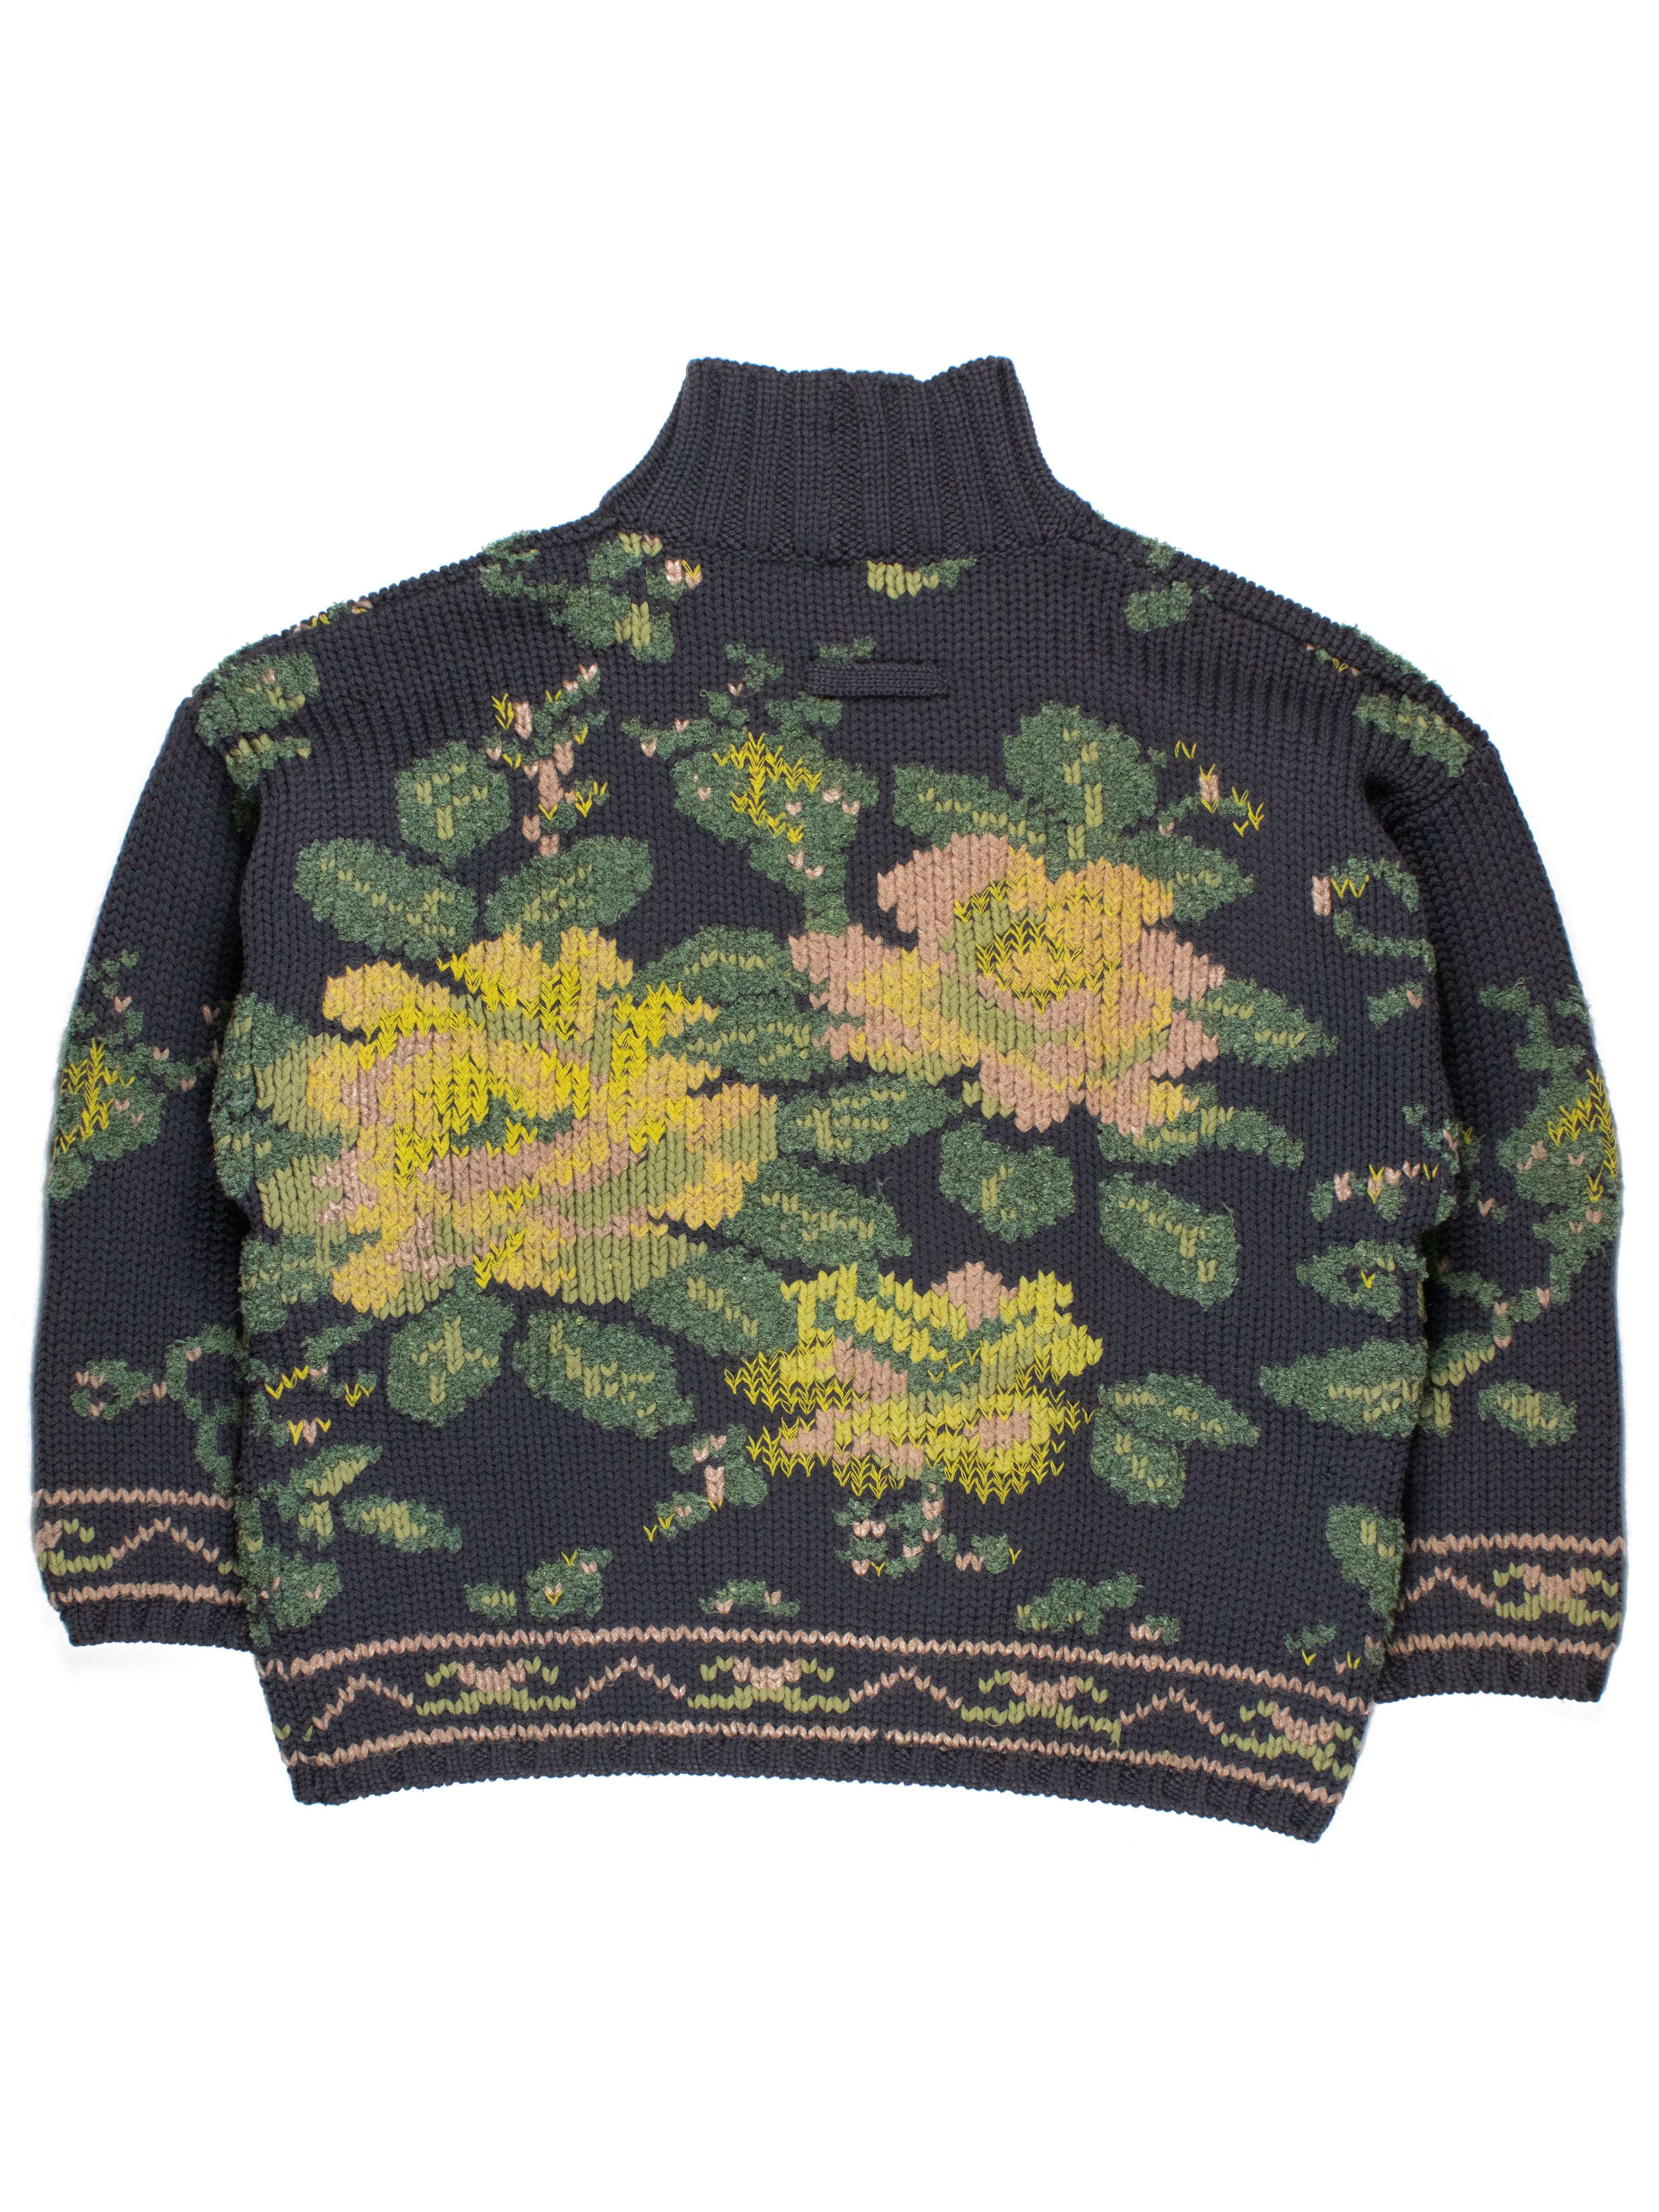 Jean Paul Gaultier AW1984 Floral Sweater In Good Condition In Beverly Hills, CA